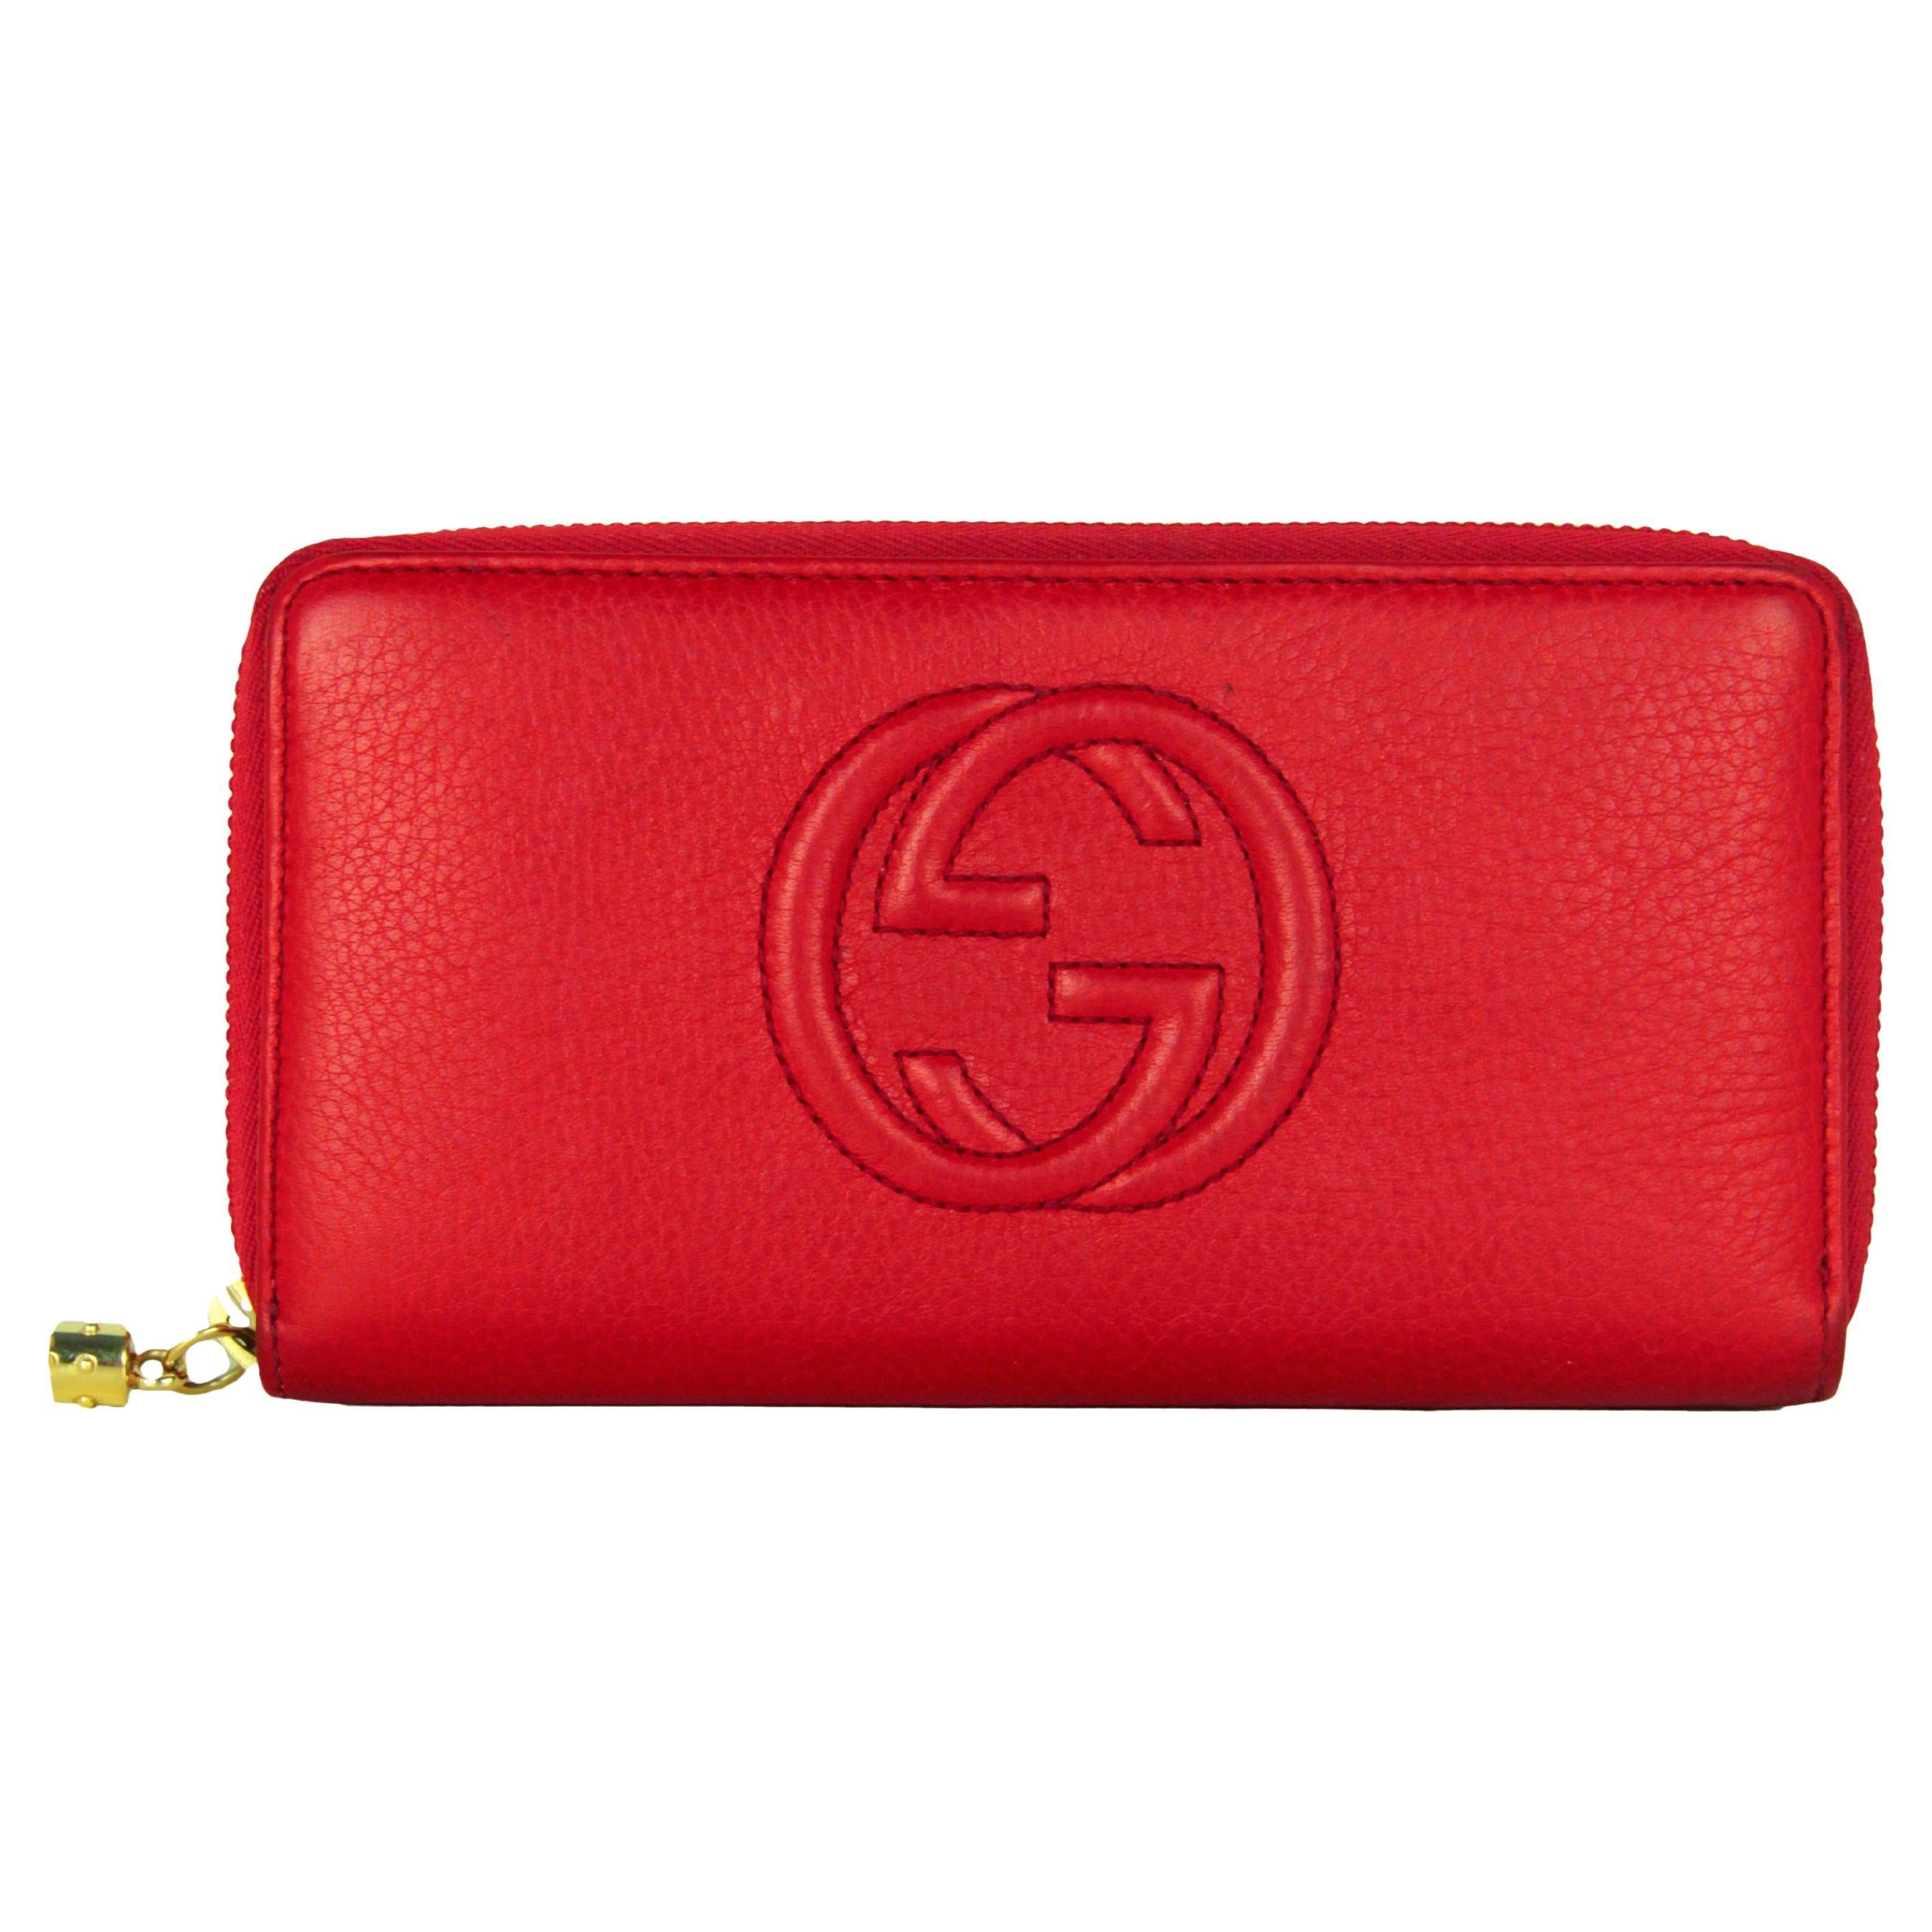 Gucci Red Leather Soho Zippy Logo Wallet